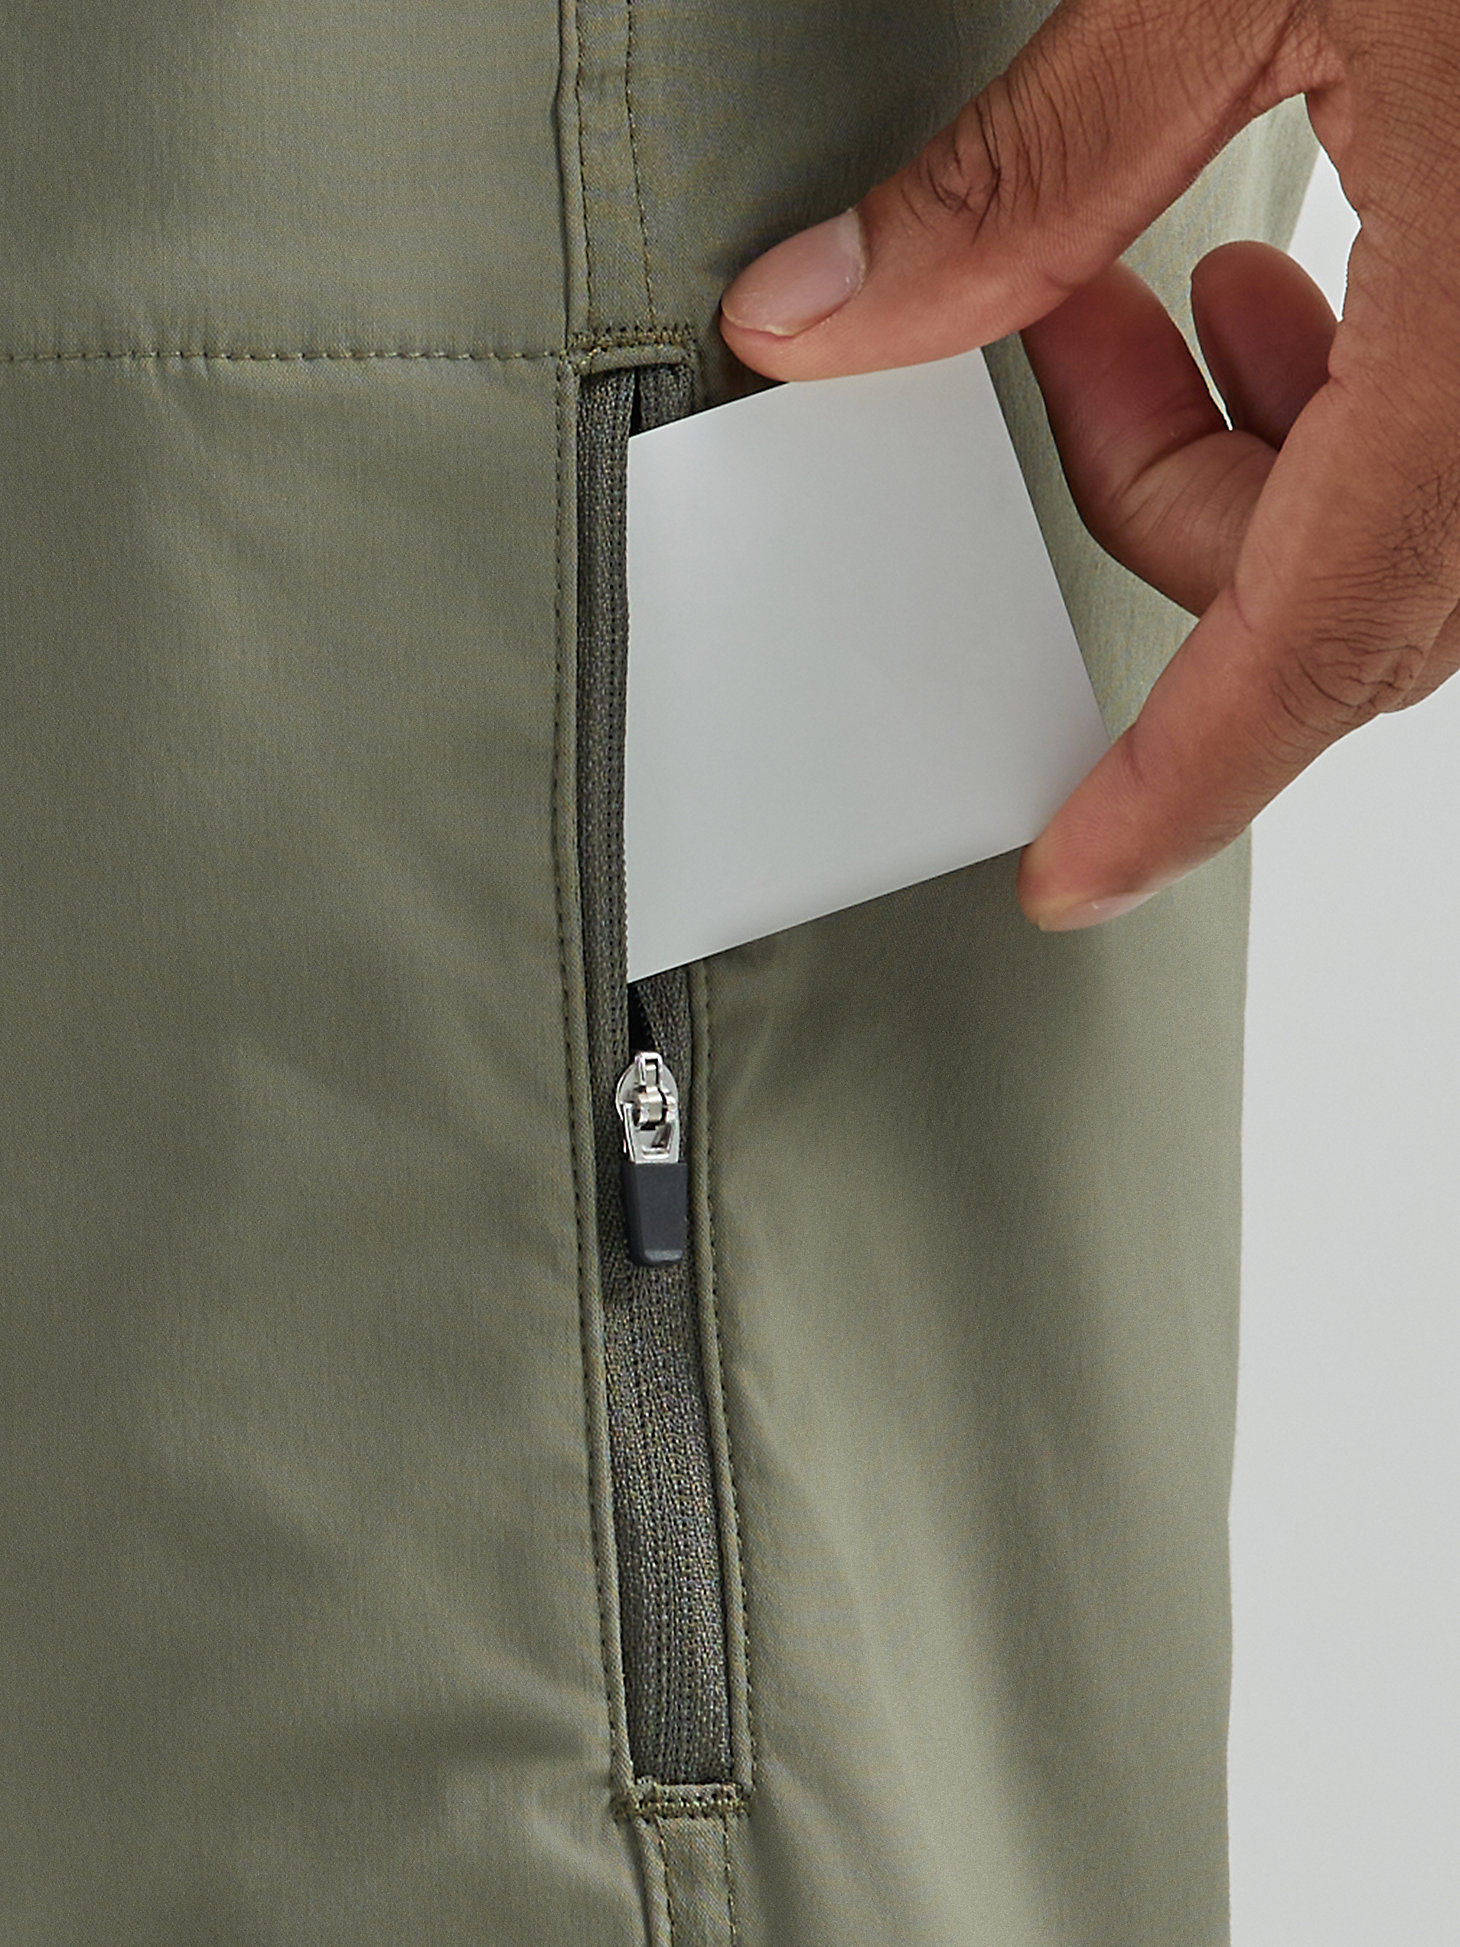 Sustainable Utility Pant in Dusty Olive alternative view 4